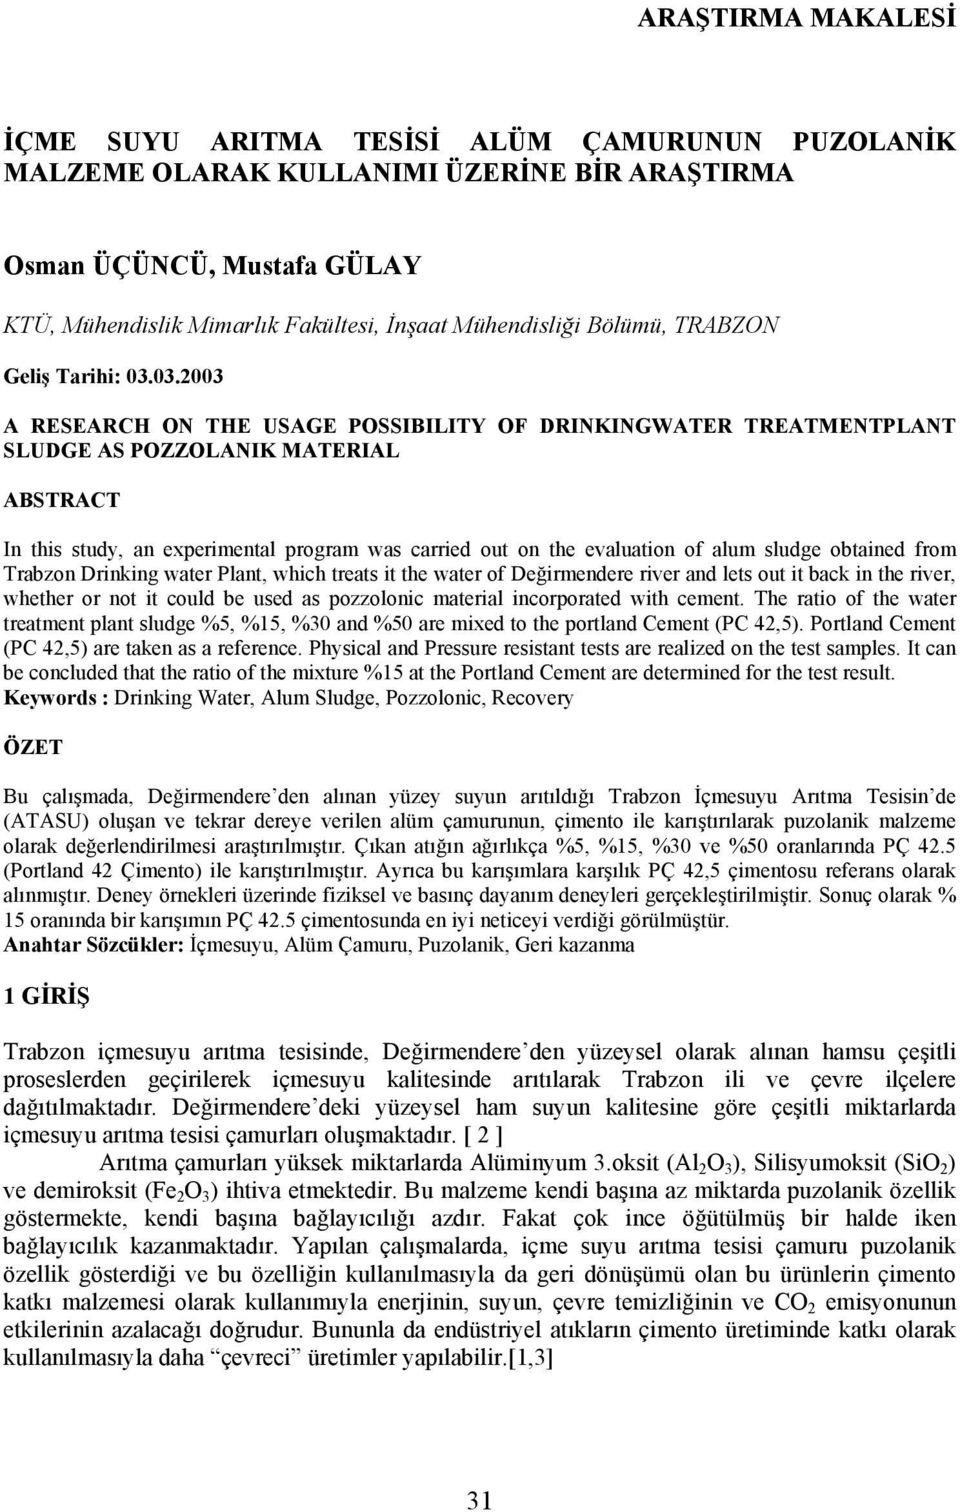 03.2003 A RESEARCH ON THE USAGE POSSIBILITY OF DRINKINGWATER TREATMENTPLANT SLUDGE AS POZZOLANIK MATERIAL ABSTRACT In this study, an experimental program was carried out on the evaluation of alum